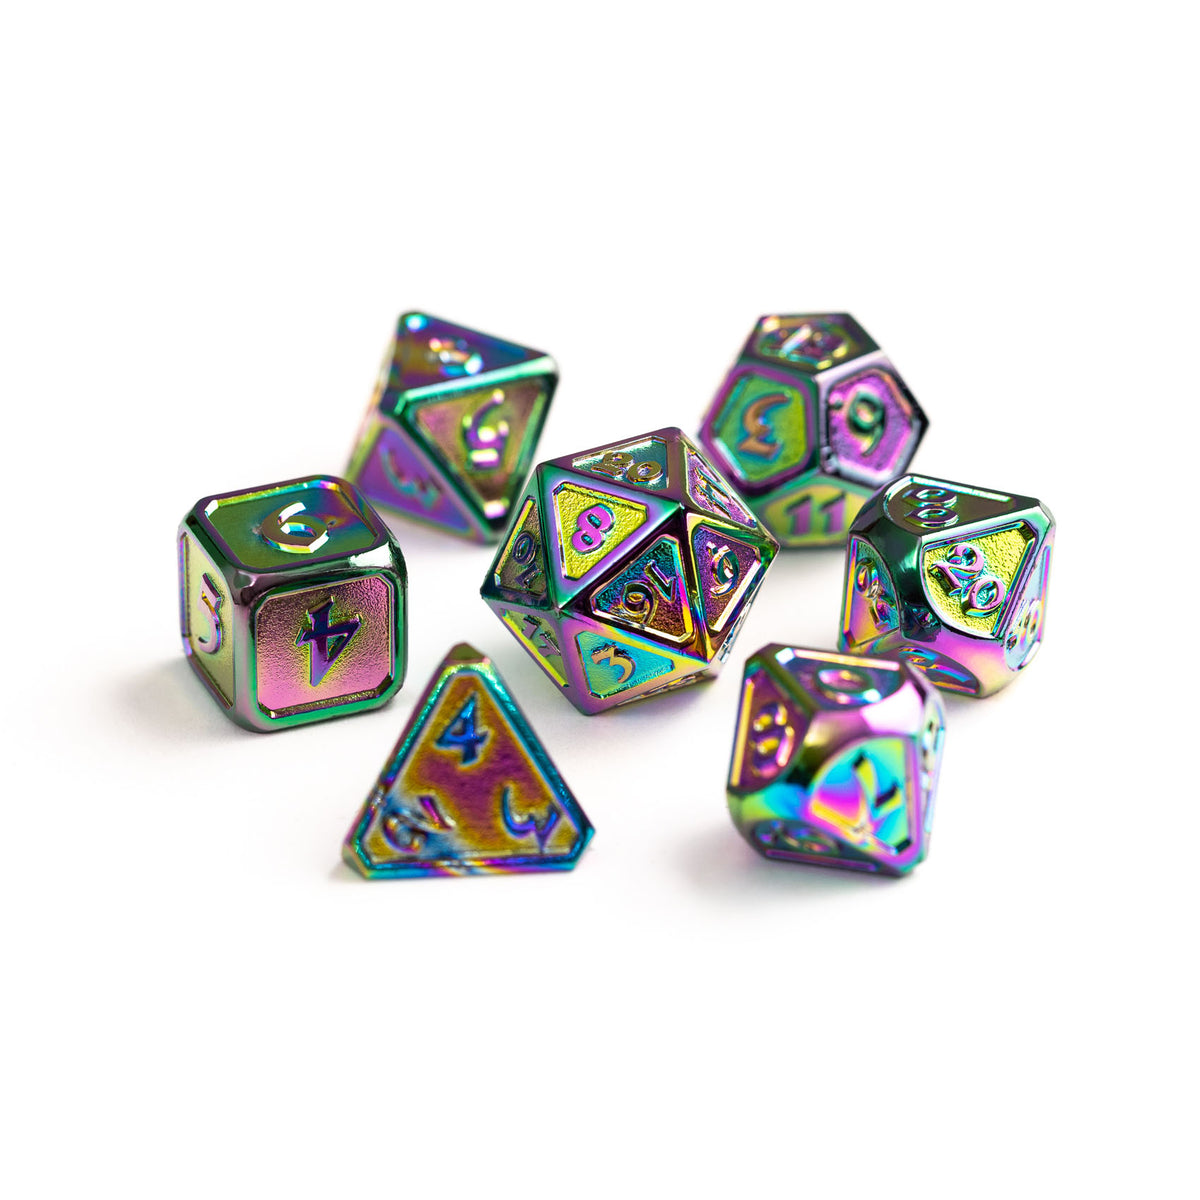 7pc RPG Set - Mythica Scorched Rainbow